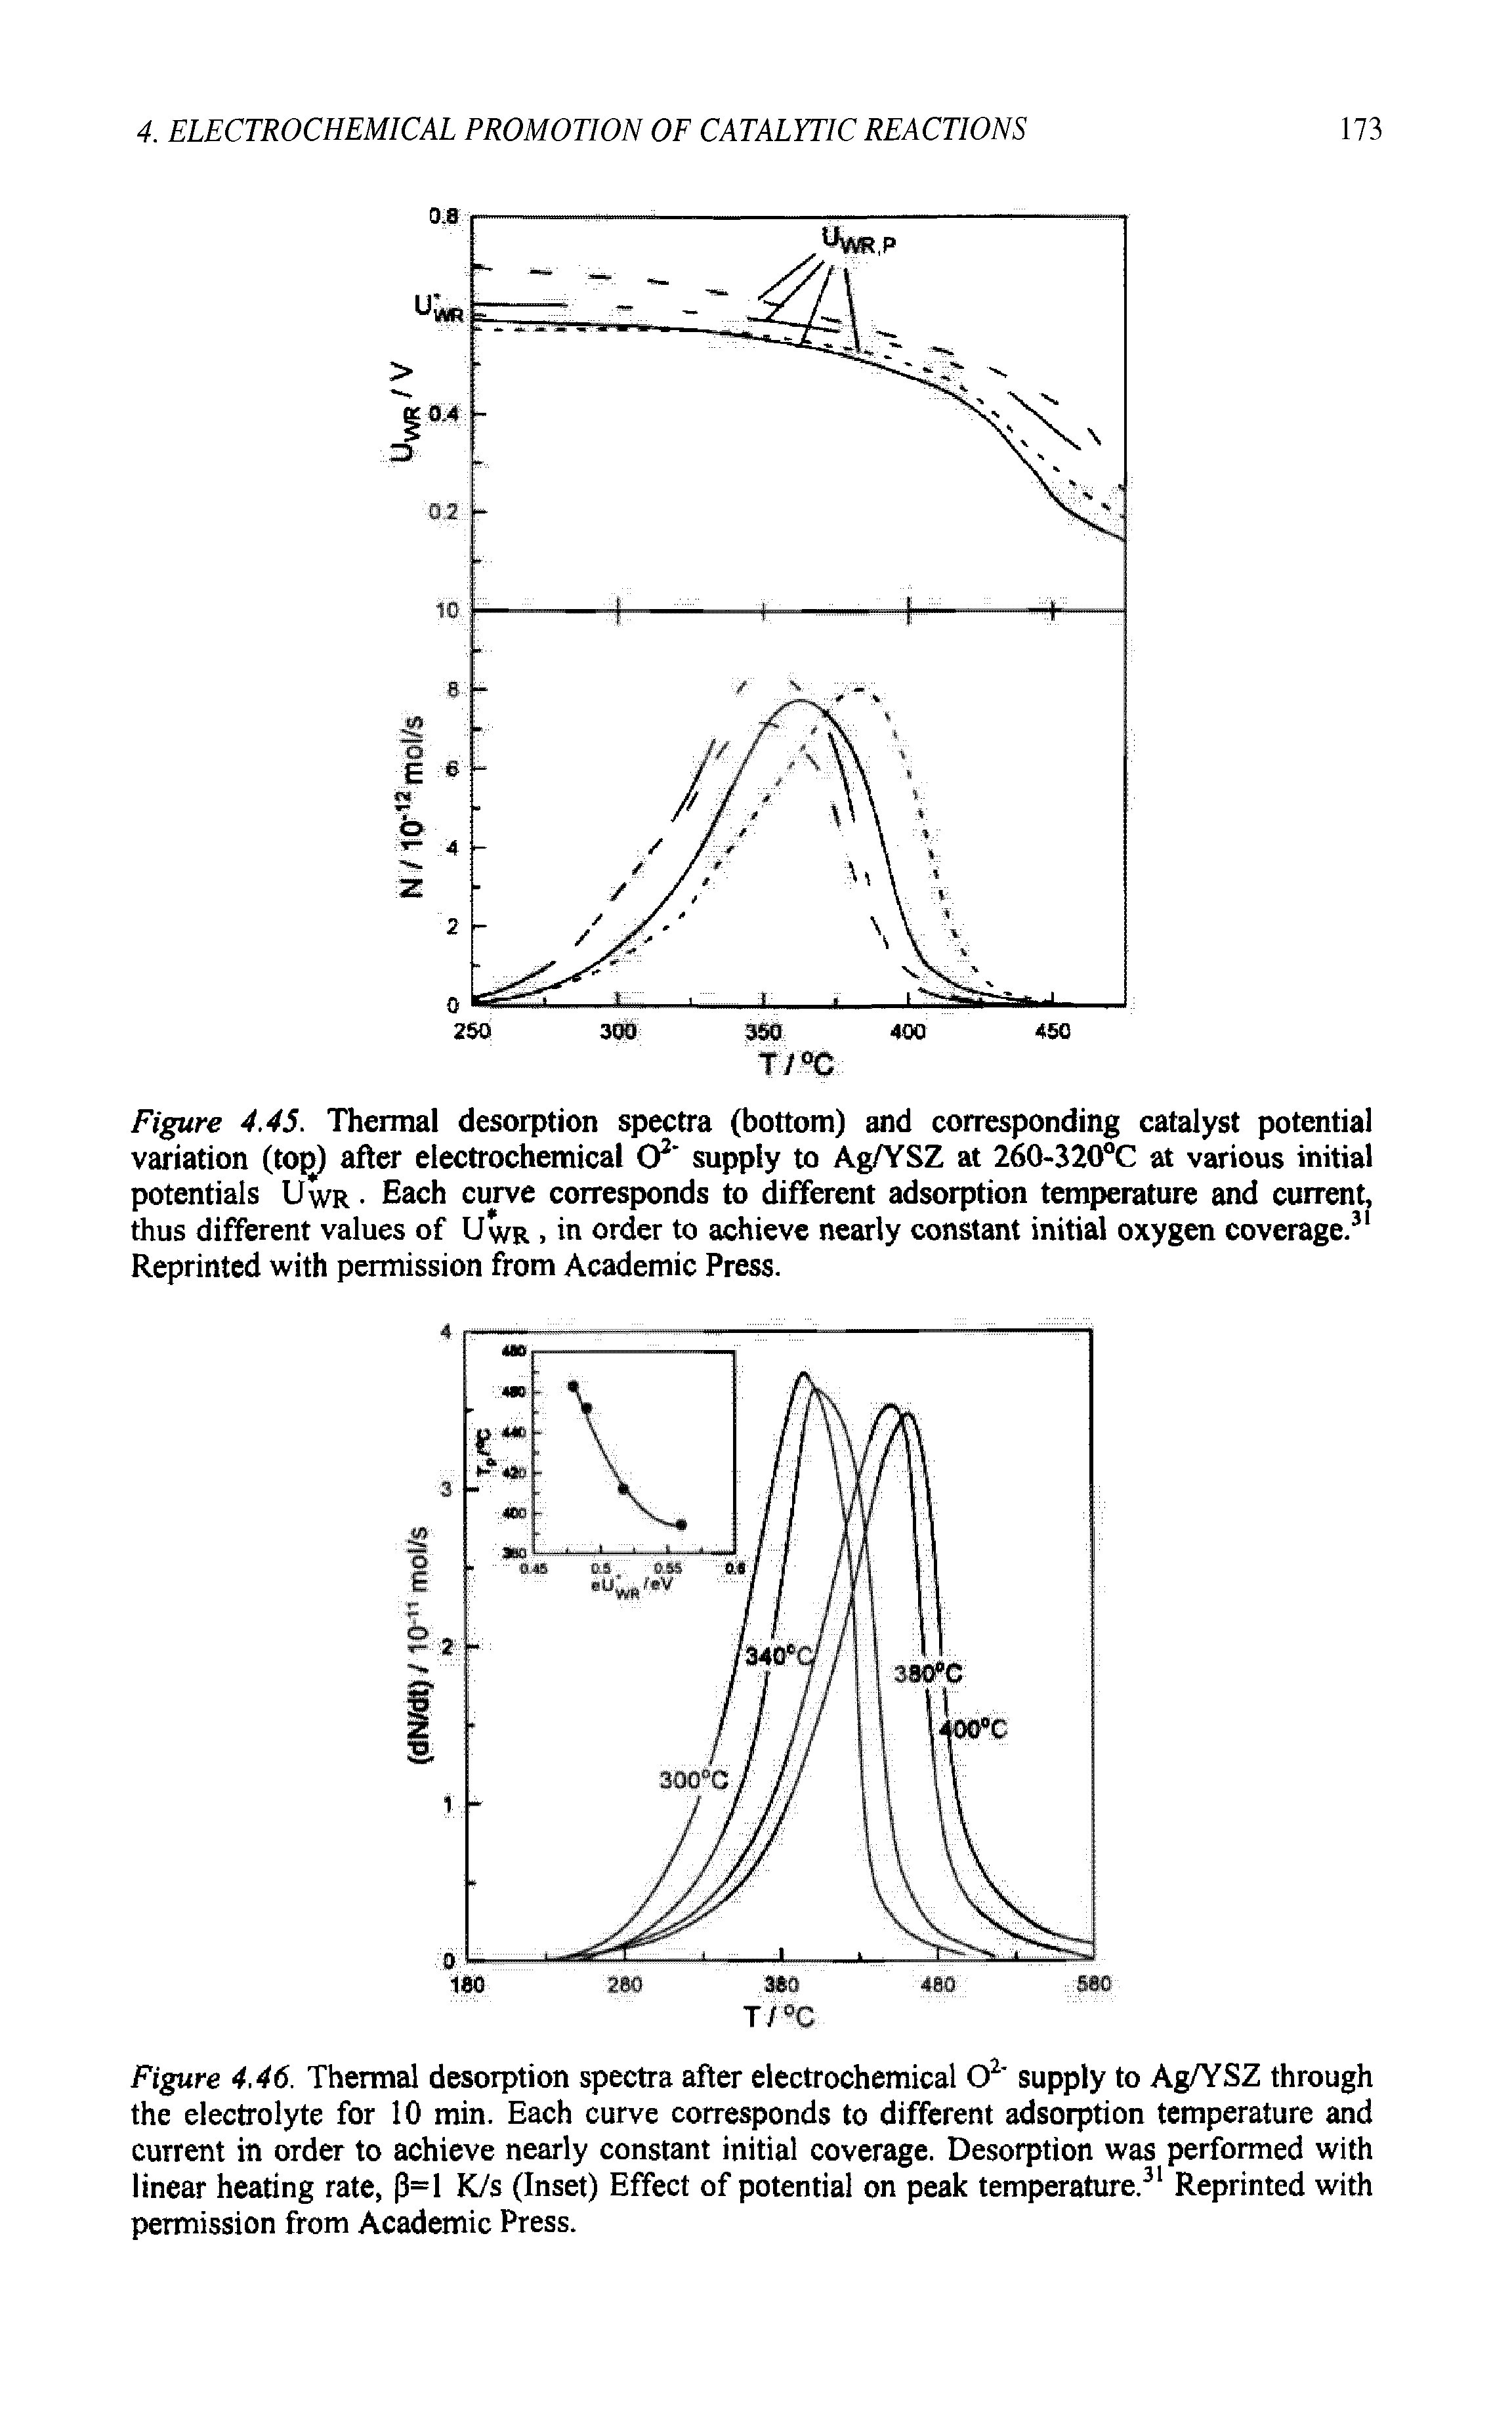 Figure 4.46. Thermal desorption spectra after electrochemical O2 supply to Ag/YSZ through the electrolyte for 10 min. Each curve corresponds to different adsorption temperature and current in order to achieve nearly constant initial coverage. Desorption was performed with linear heating rate, p=l K/s (Inset) Effect of potential on peak temperature.31 Reprinted with permission from Academic Press.